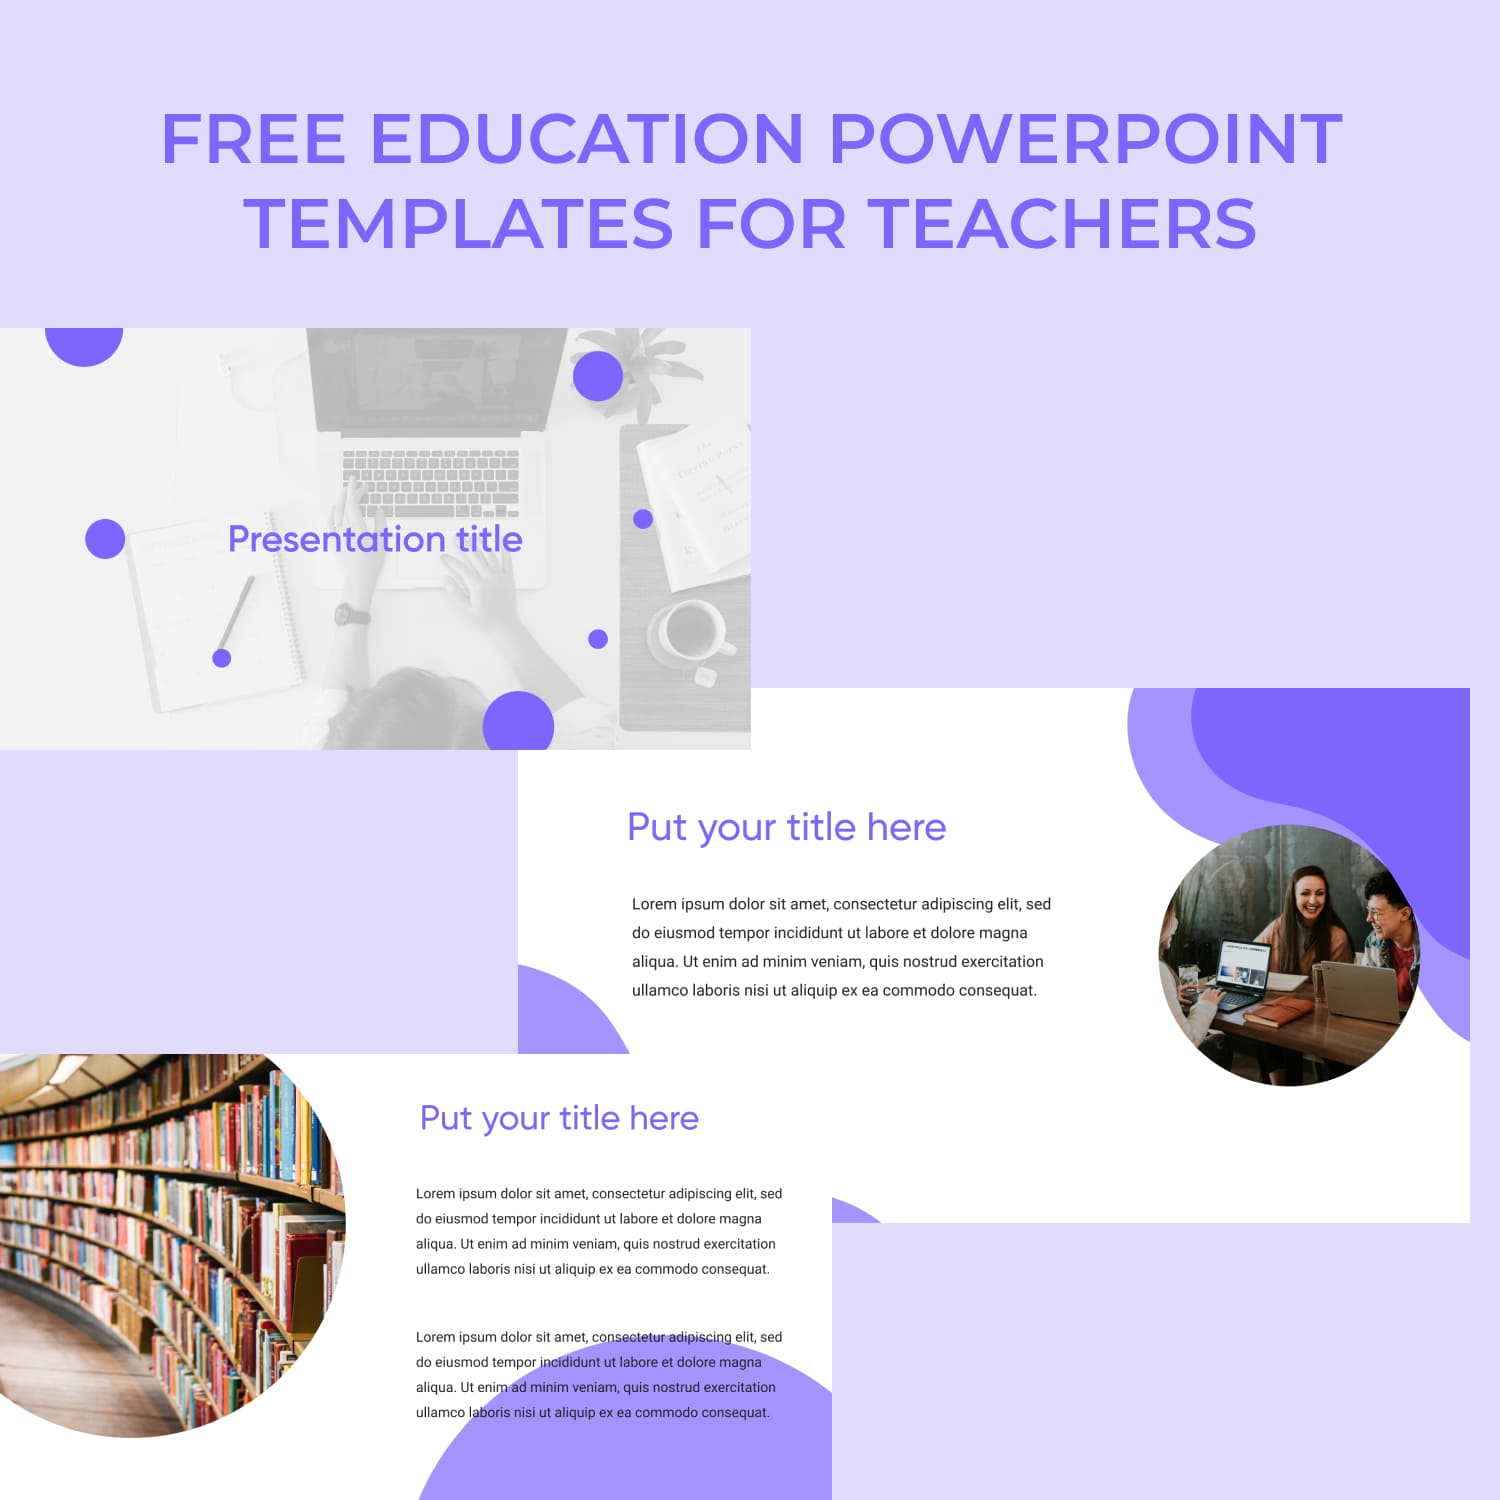 Free Education Powerpoint Templates For Teachers 1500x1500 2.